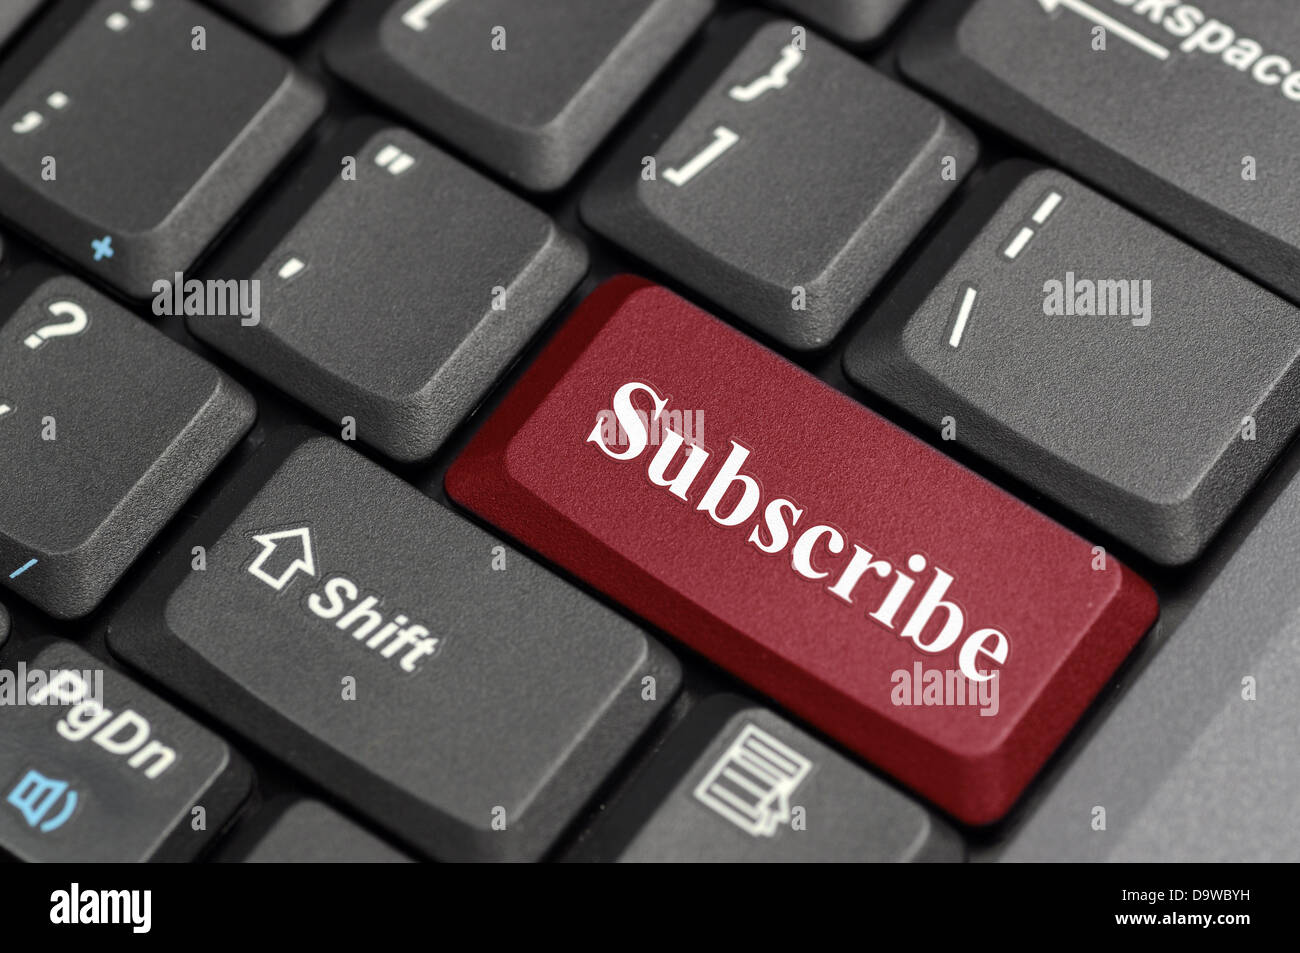 Subscribe on keyboard Stock Photo